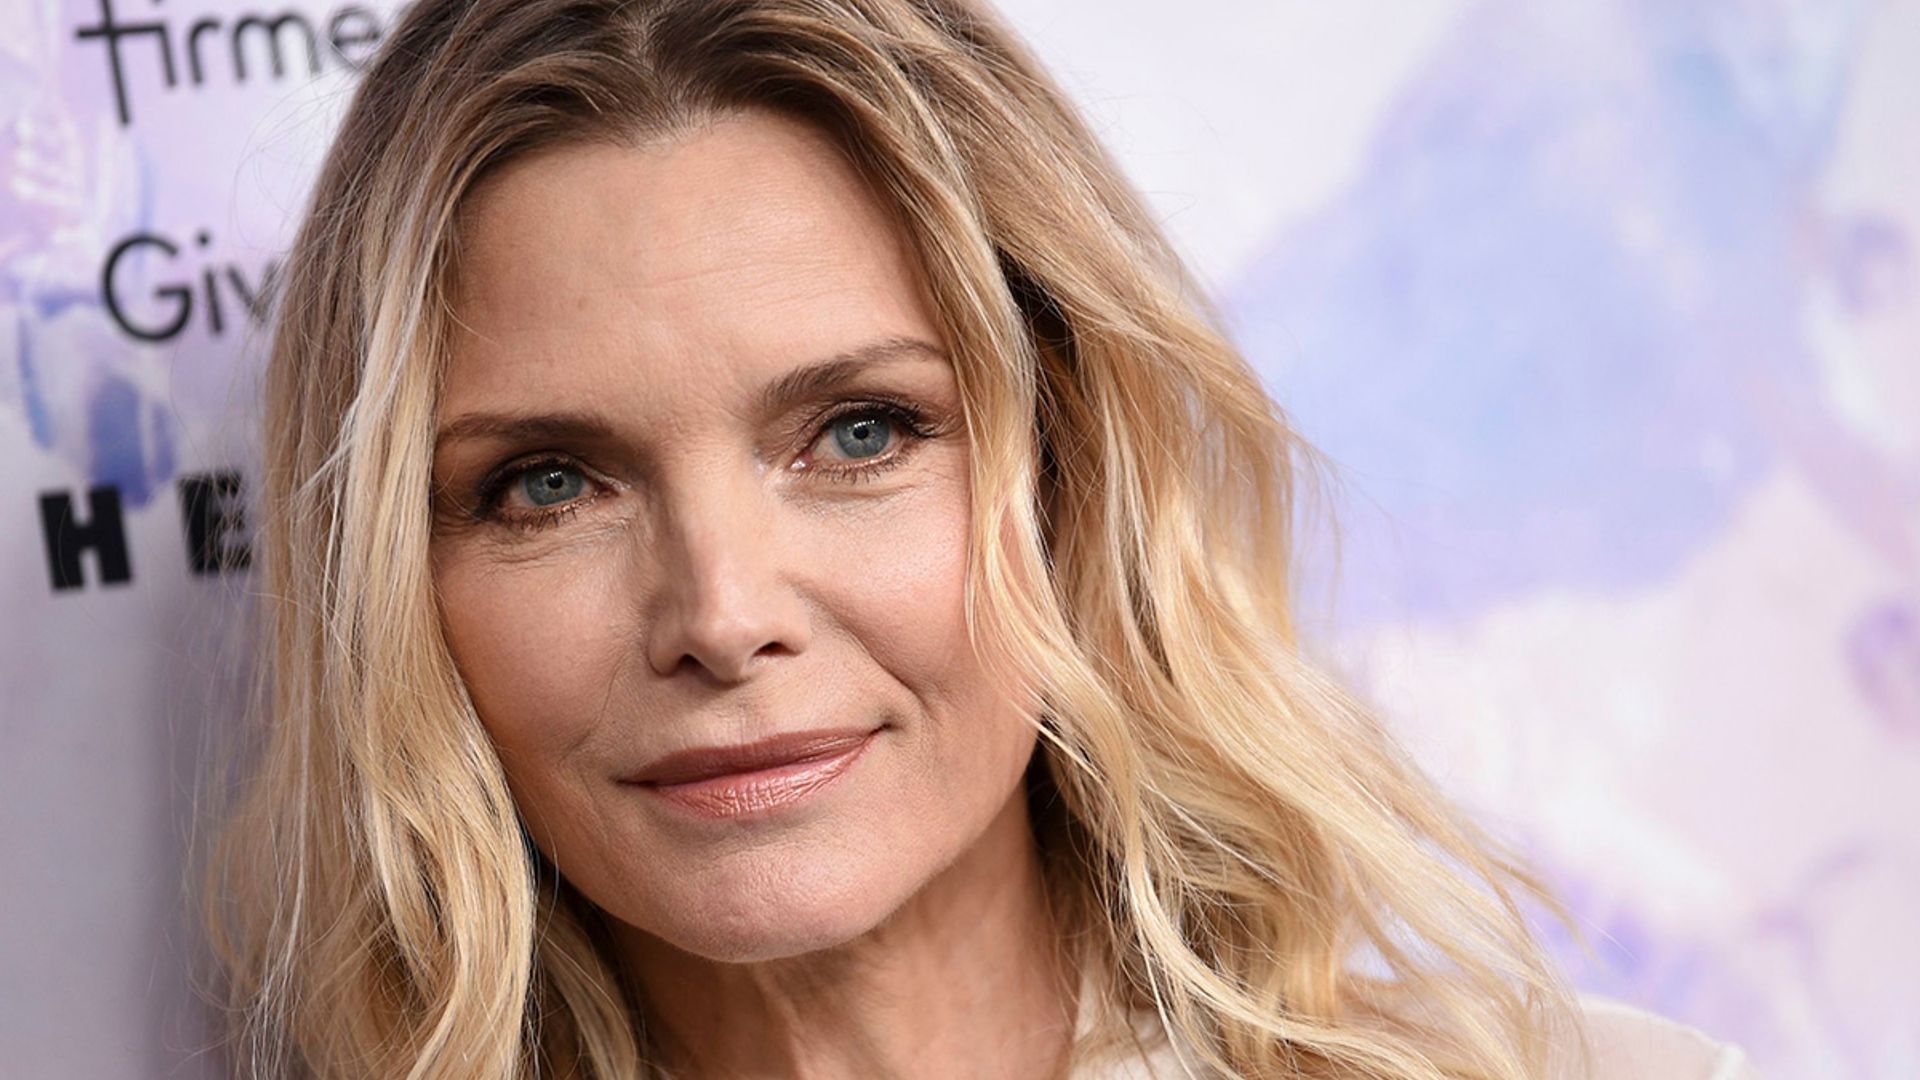 Michelle Pfeiffer delights fans with incredibly rare photo of her children